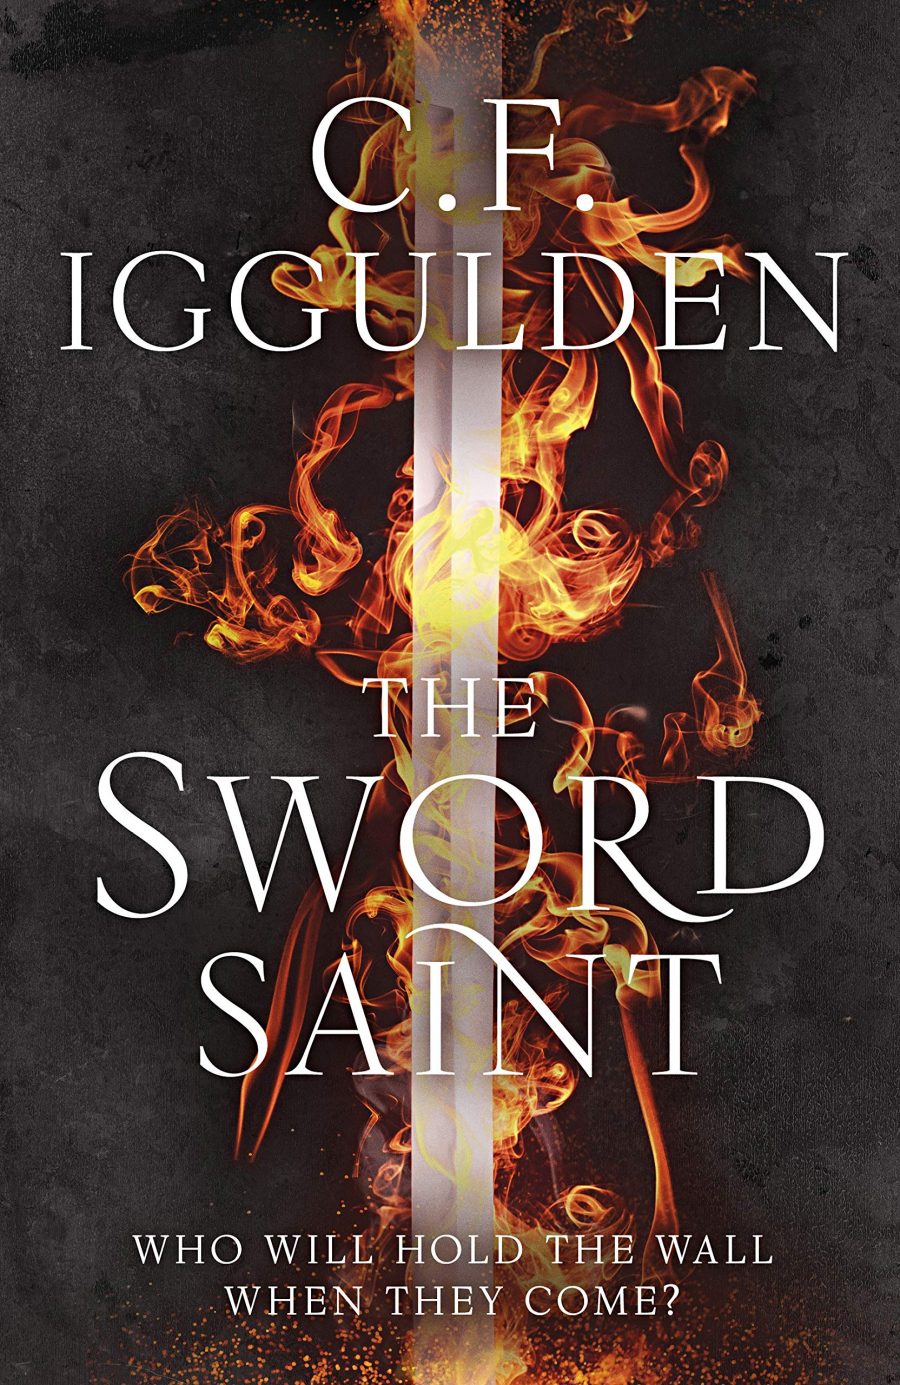 When Will The Sword Saint: Empire of Salt Book III Come Out? Release Date